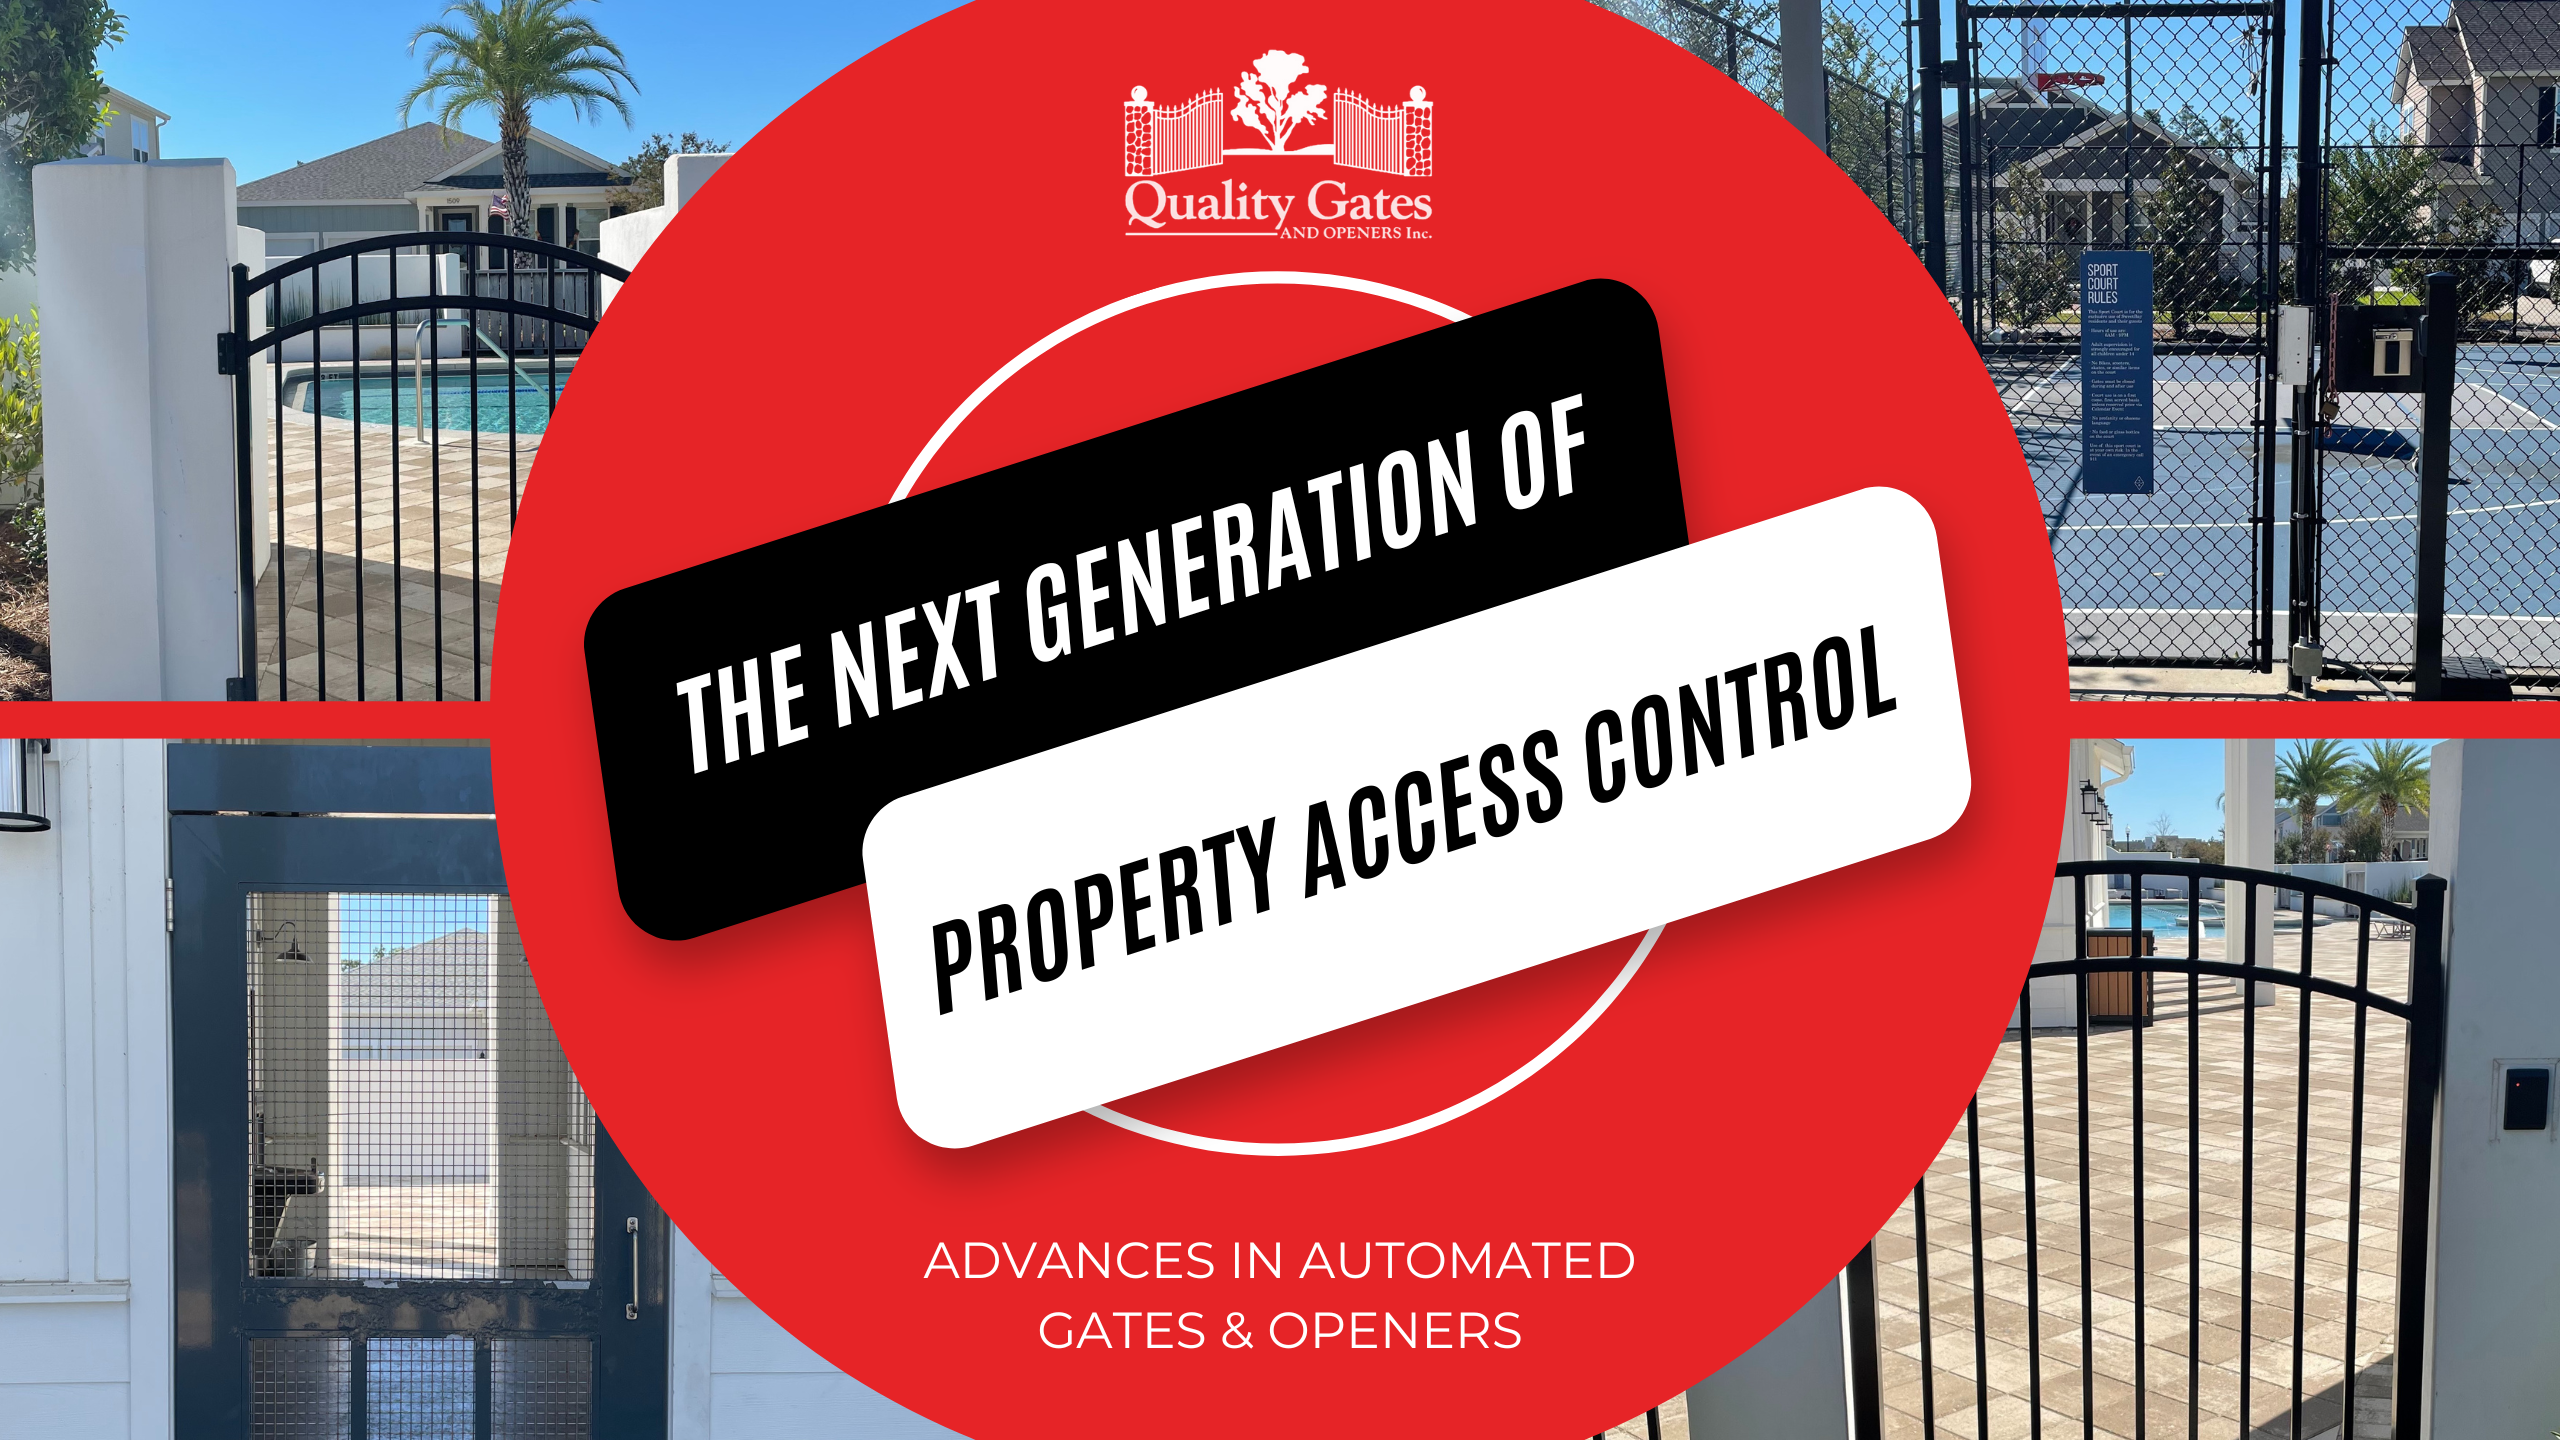 Hero Image of The Next Generation of Property Access Control by Quality Gates & Openers